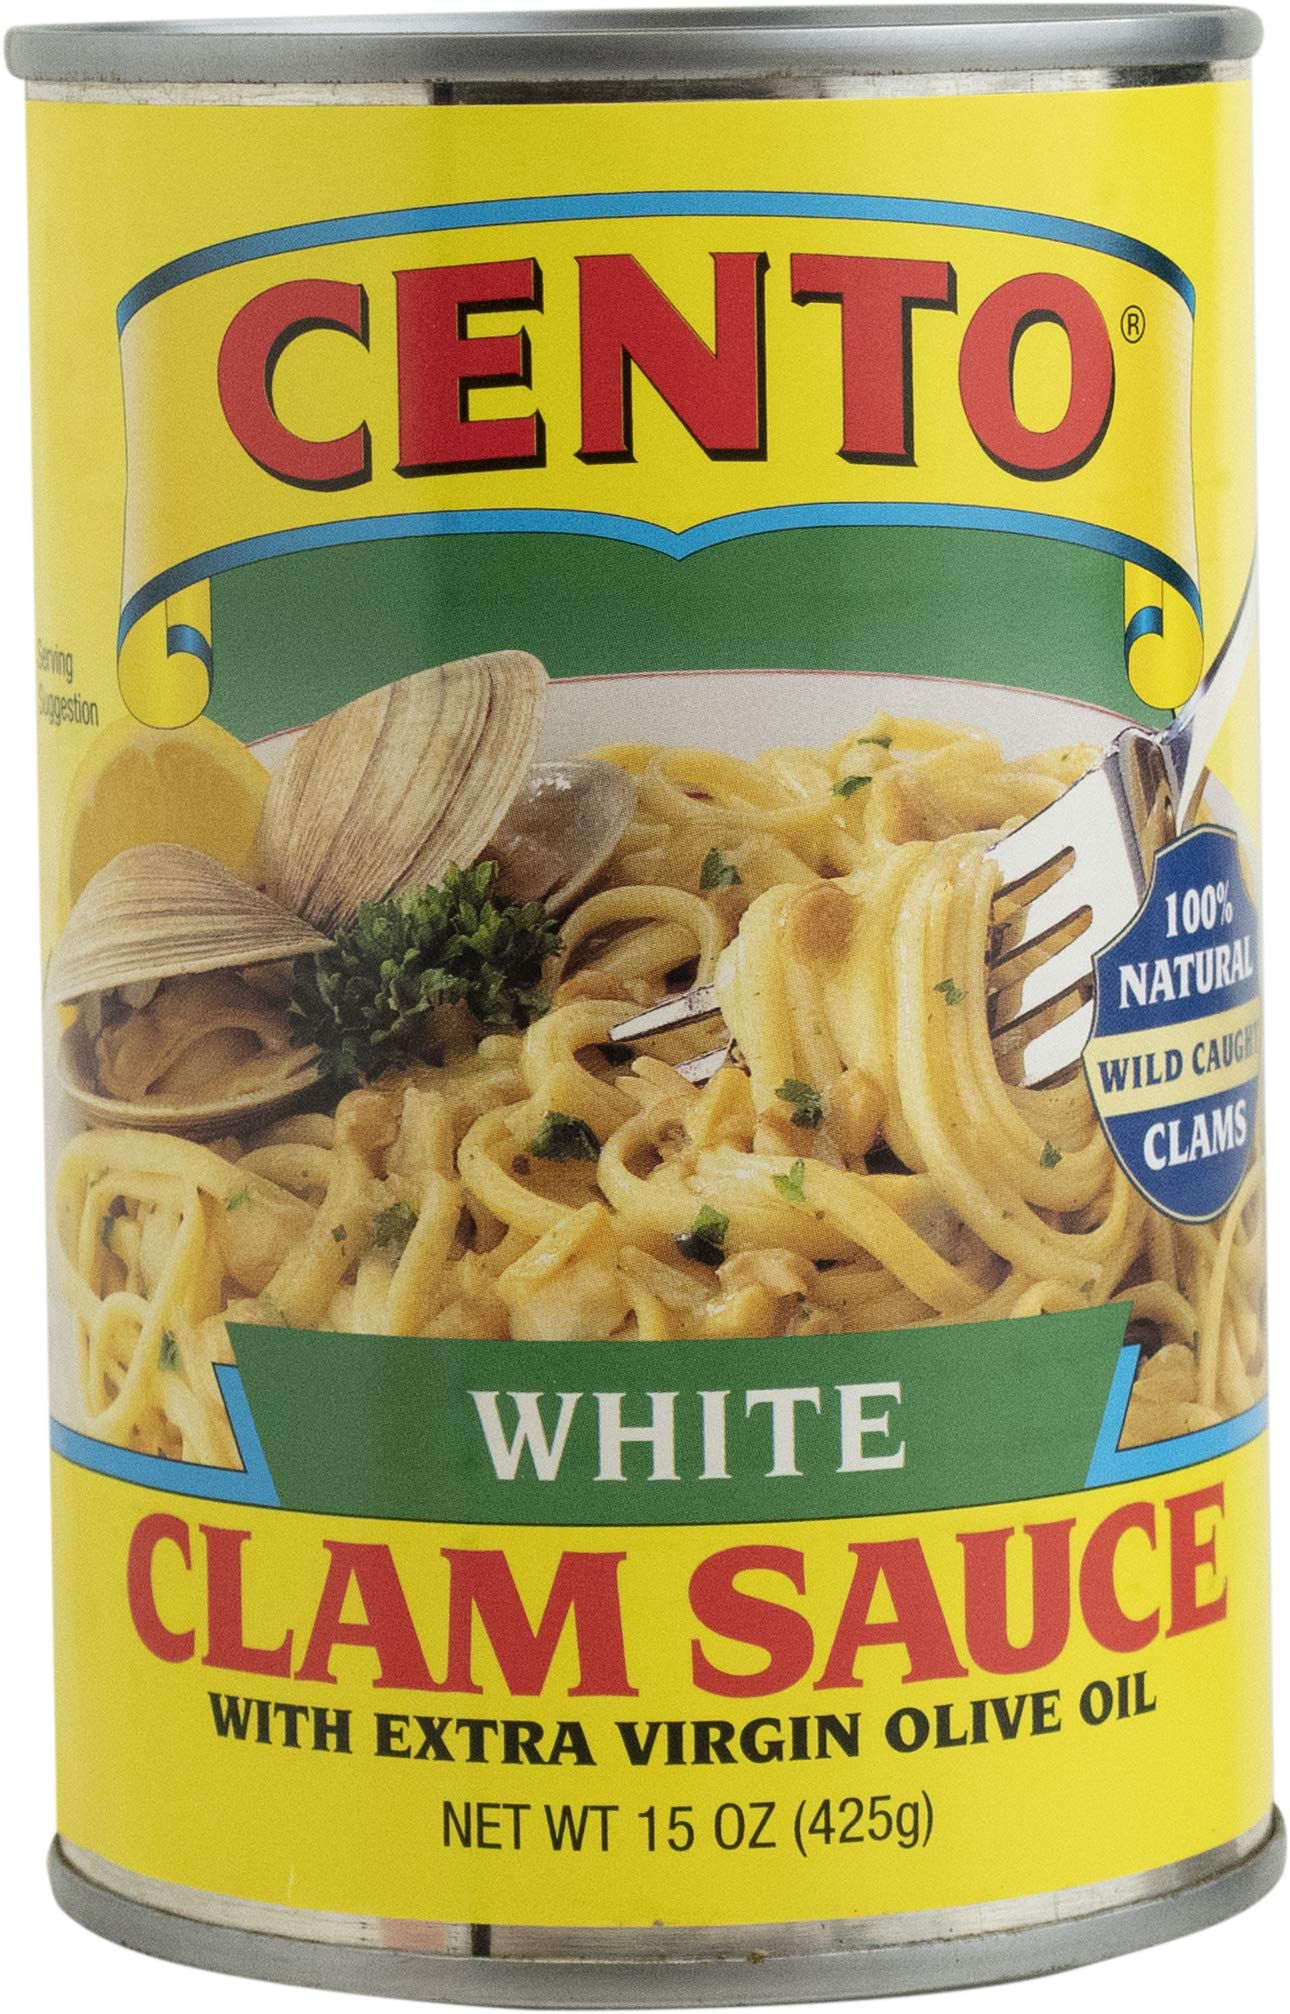 Cento White Clam Sauce, 15-Ounce (Pack of 12)